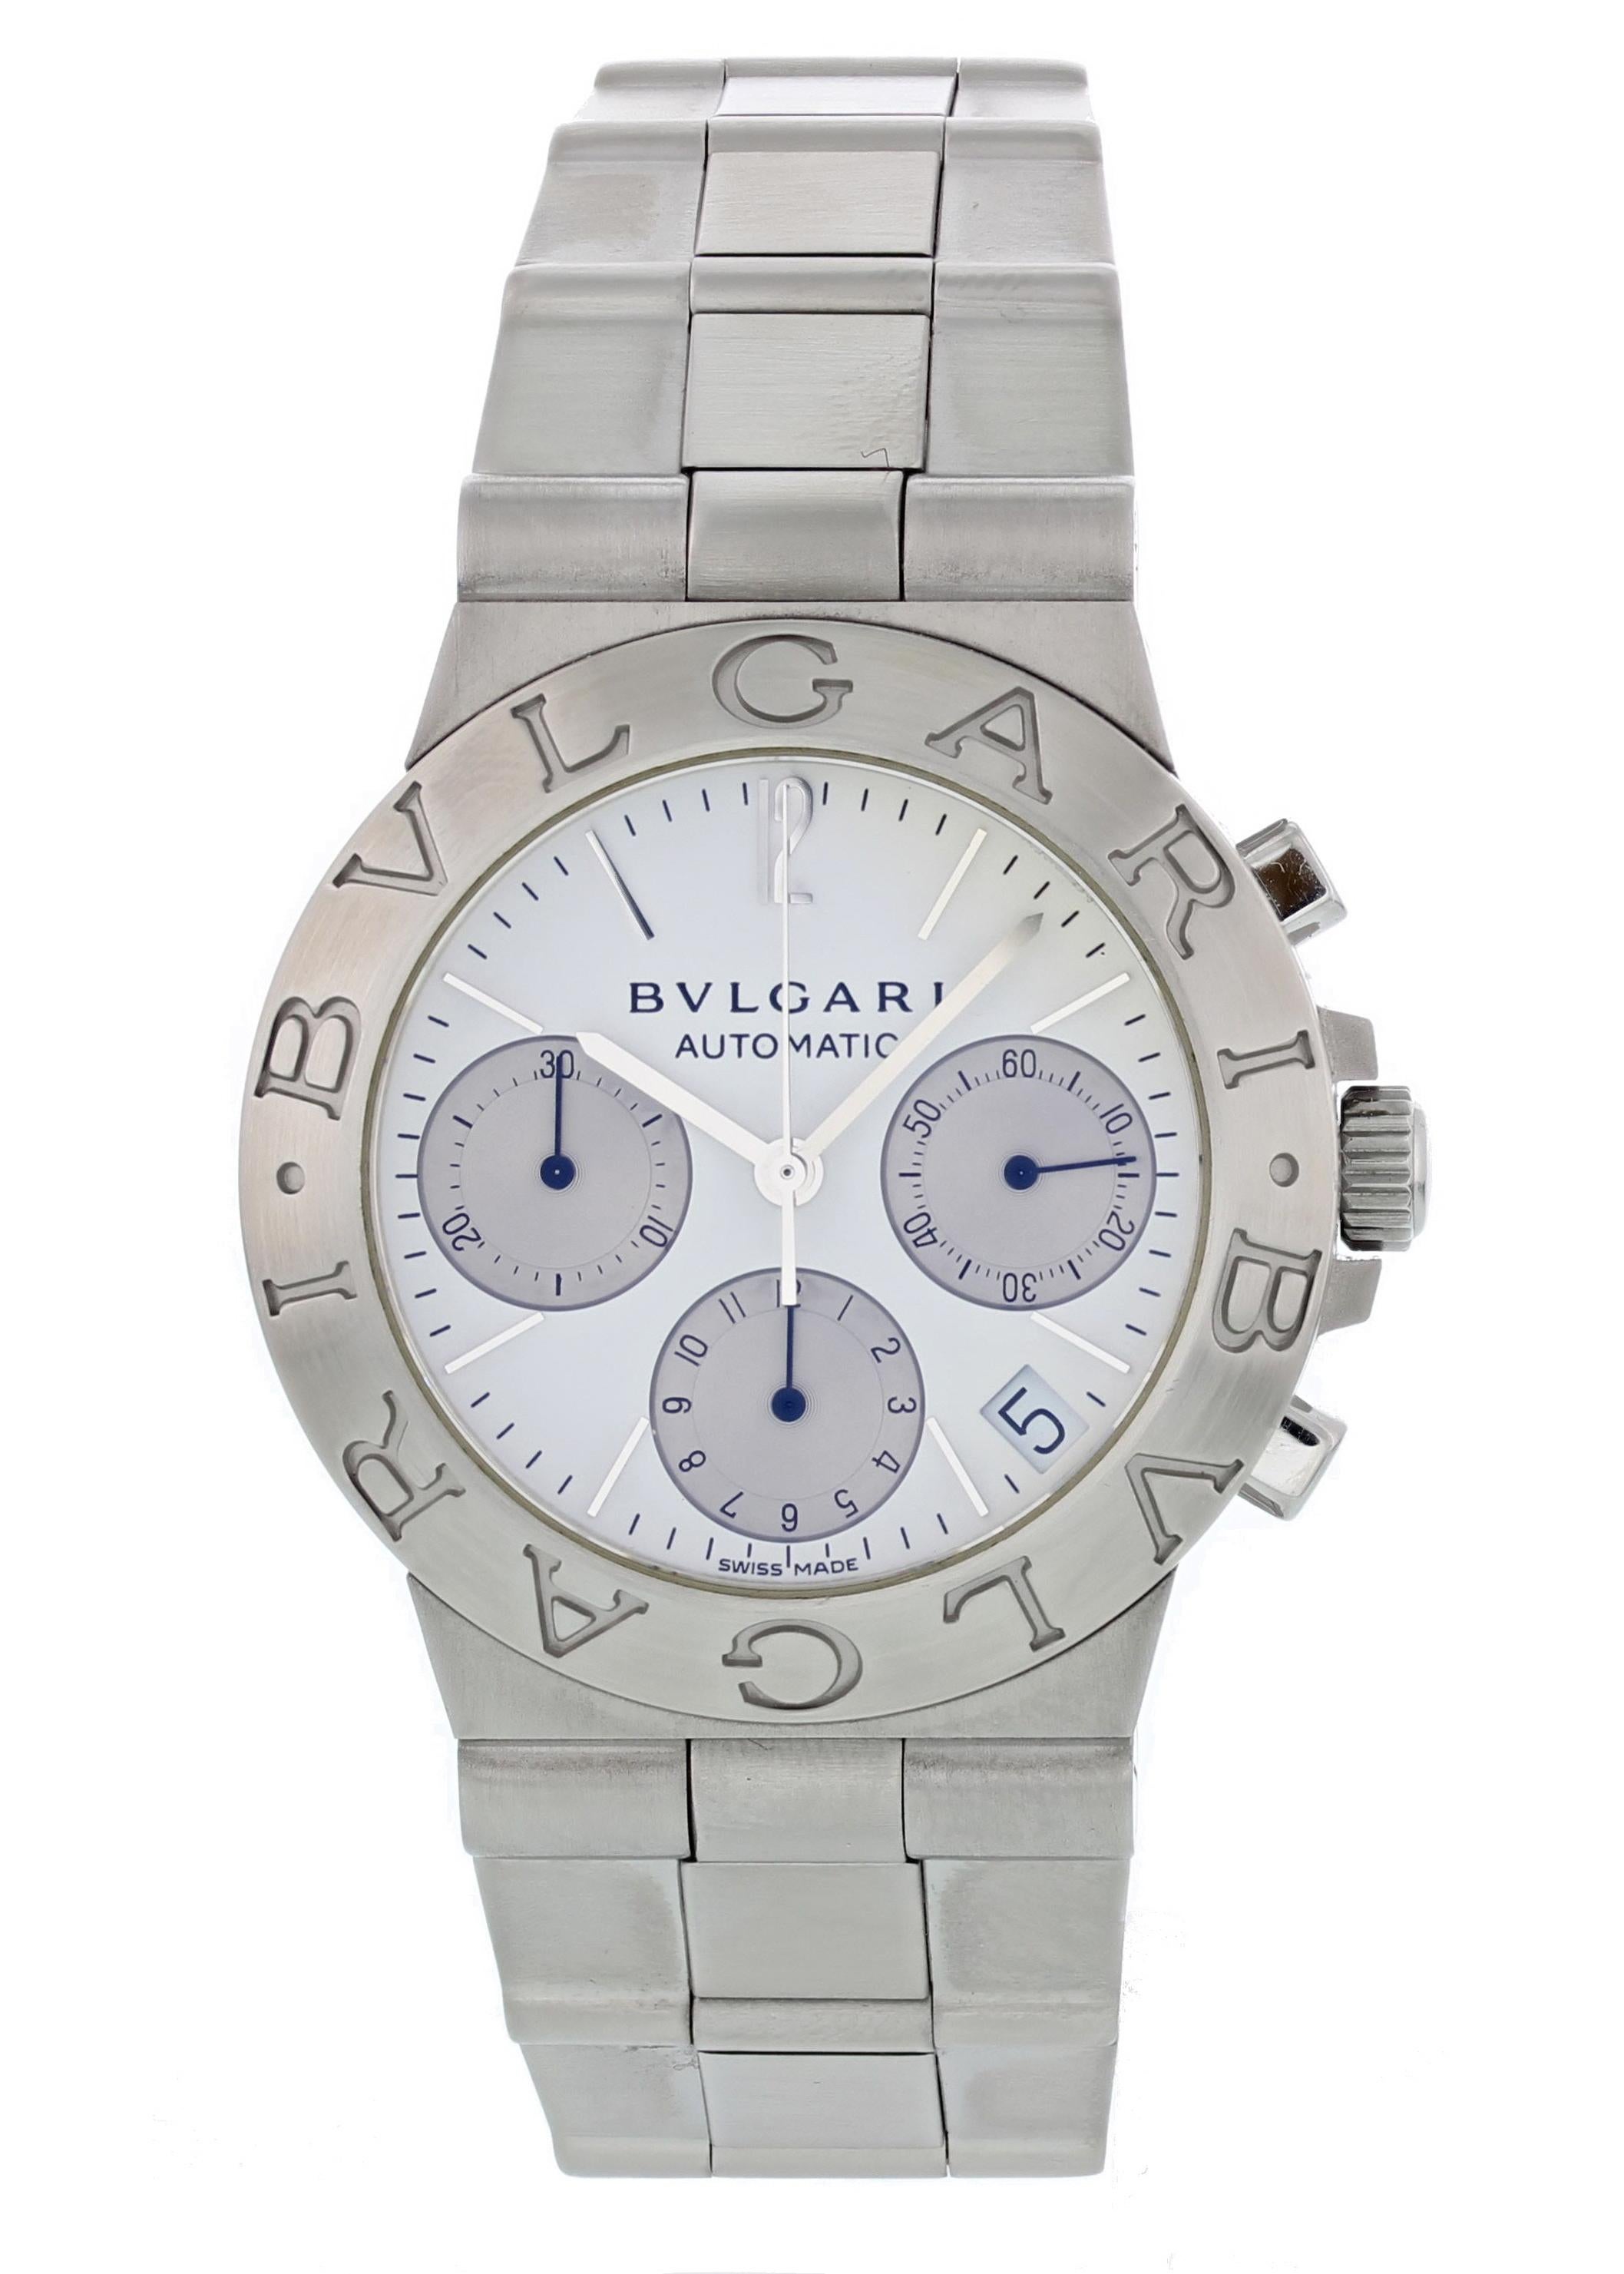 Men's Bvlgari Diagono. Stainless steel 35.5 mm case. Stainless steel bezel with Bvlgari engraving. White dial with three silver registers. Date aperture at 4:30. Stainless steel bracelet, will fit a 6.5 inch wrist. Automatic movement. Ref. CH 35